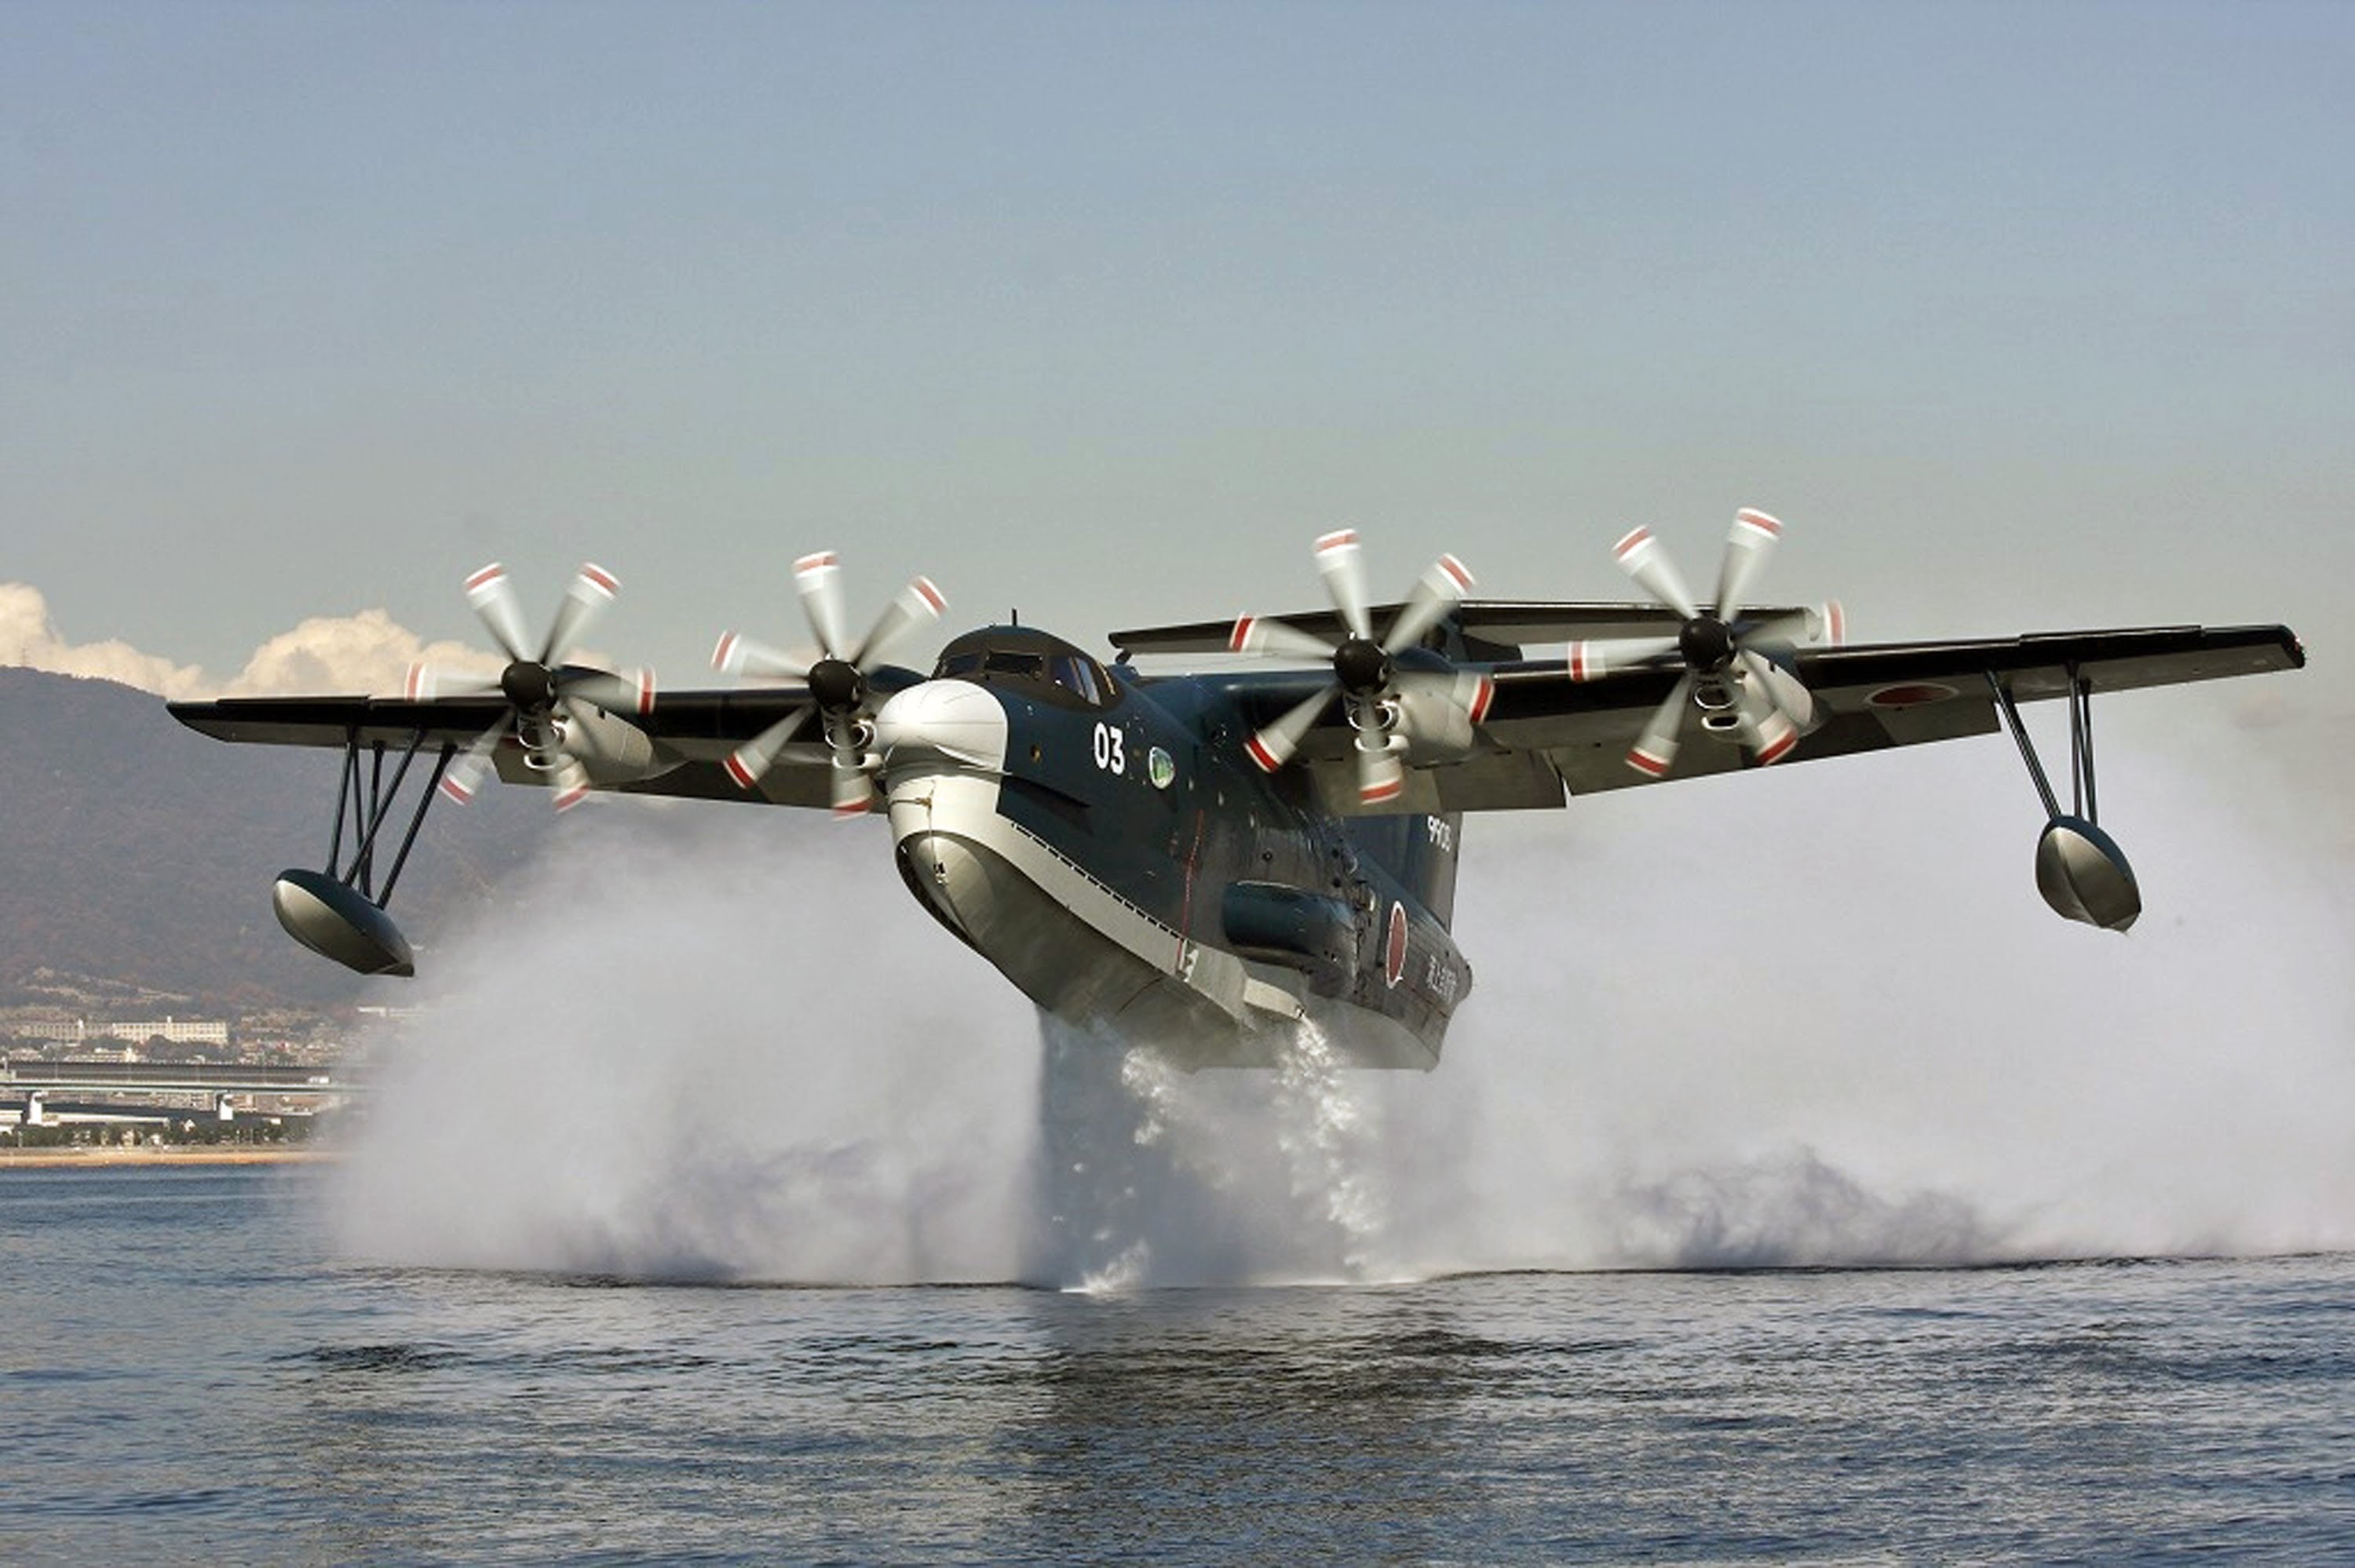 ShinMaywa-US-2-japan-amphibious-will-be-force-multiplier-for-indian-navy.jpg